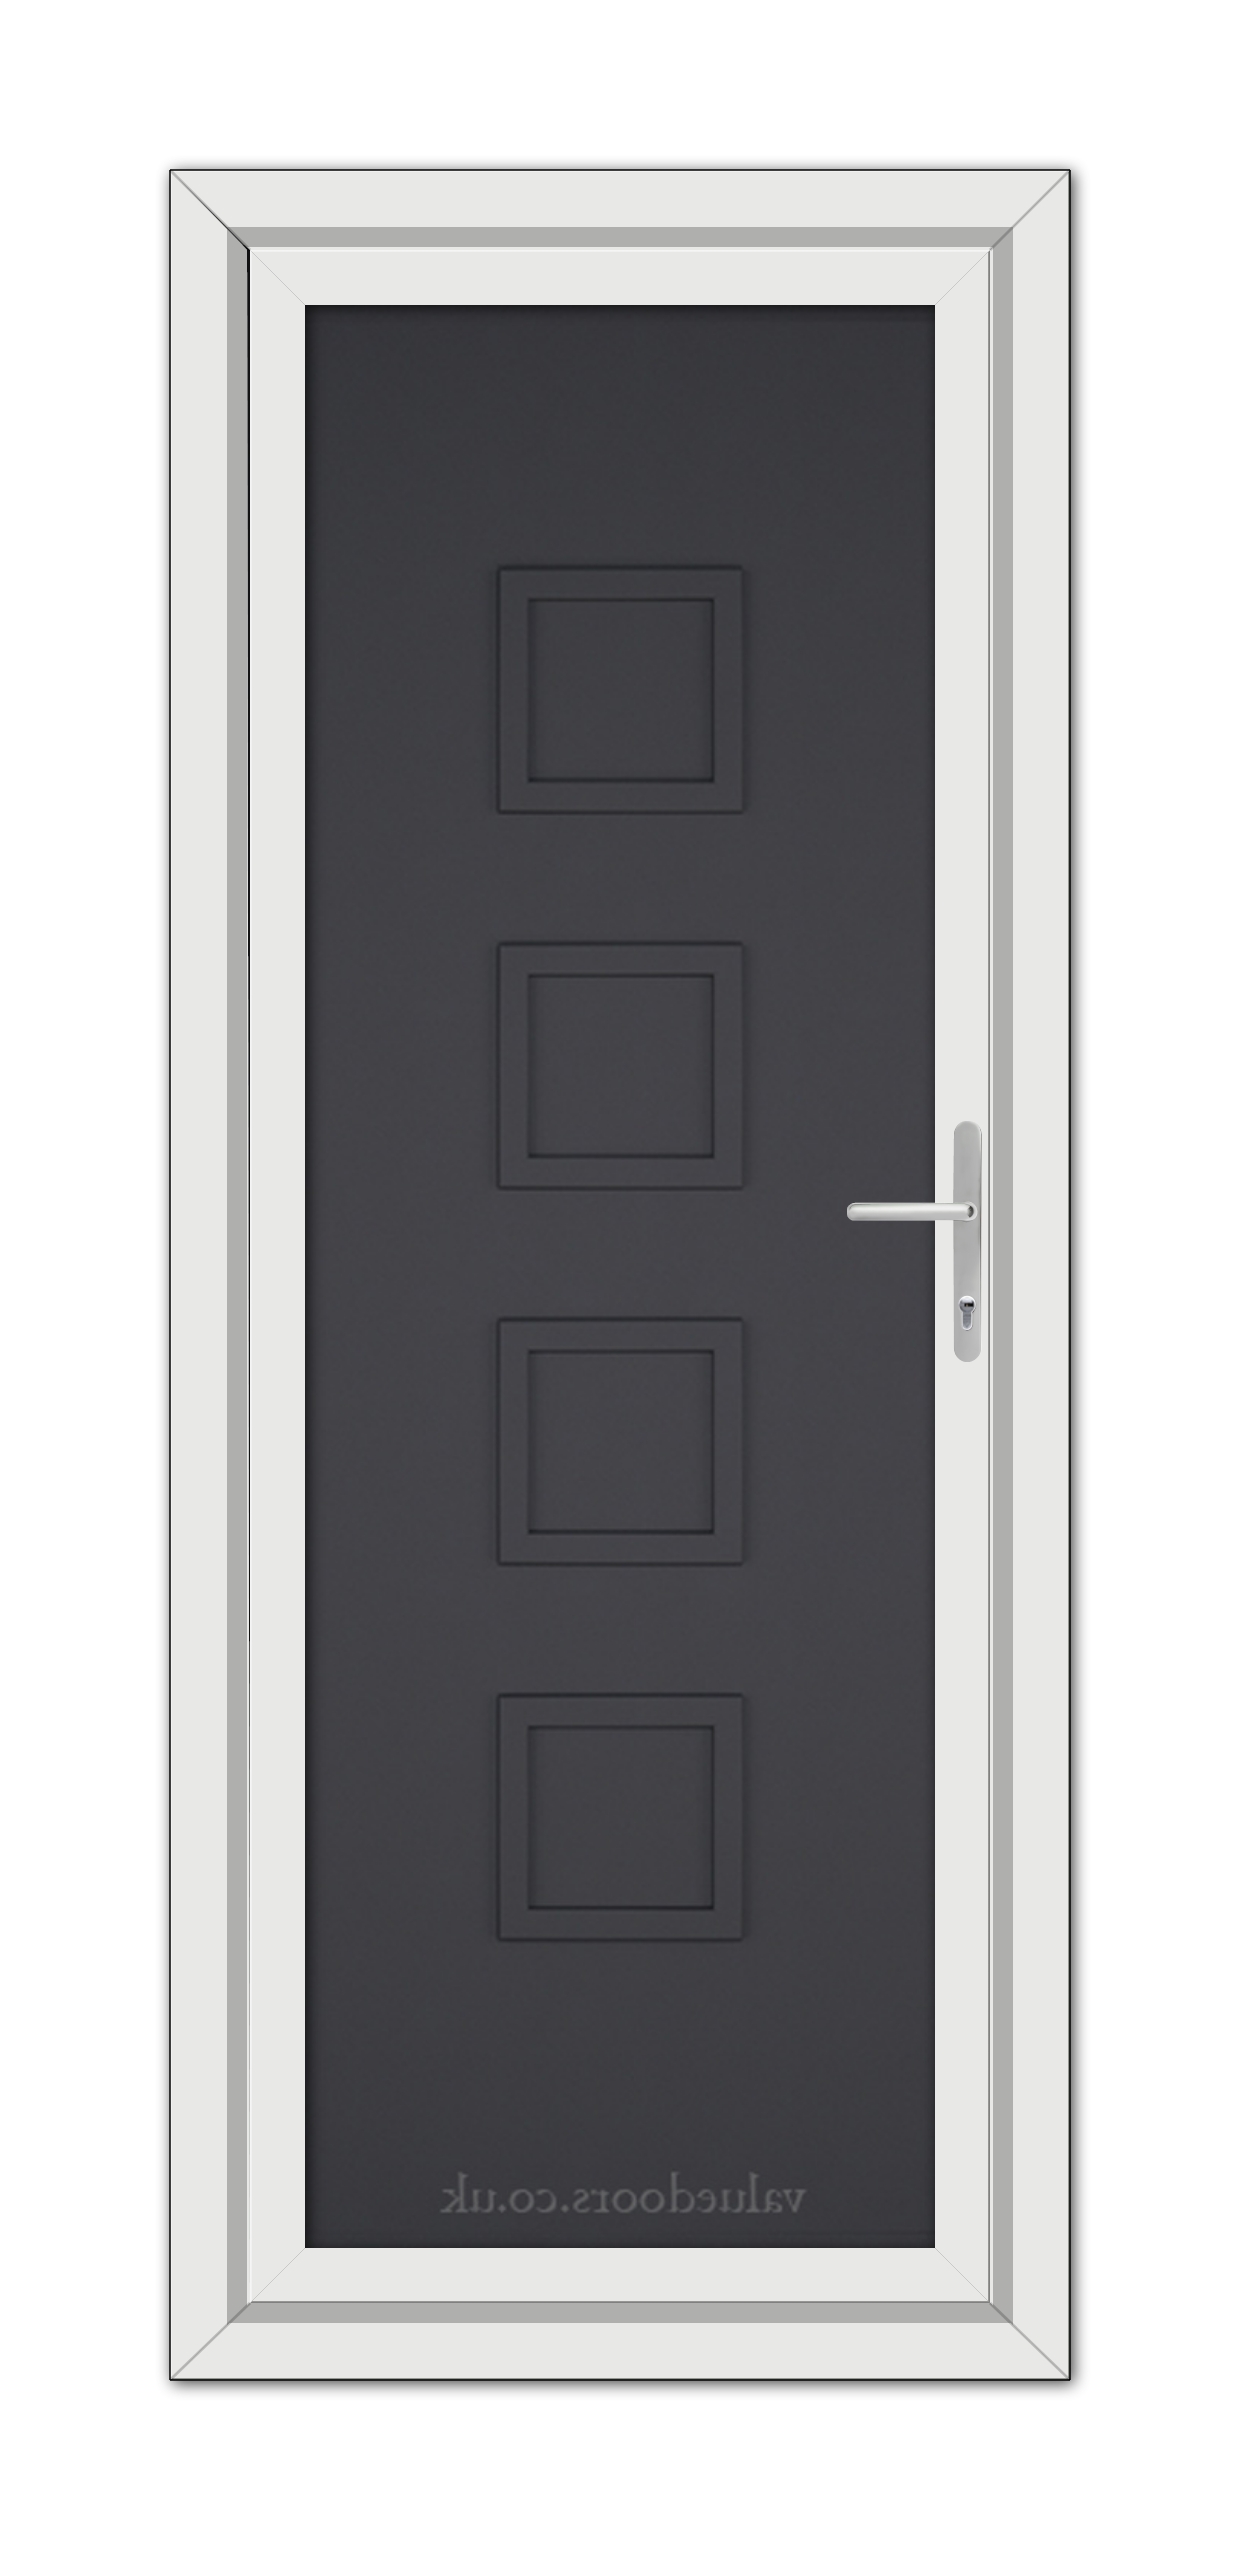 Grey Modern 5034 Solid uPVC door with five rectangular panels and a silver handle, set within a white frame, viewed from the front.